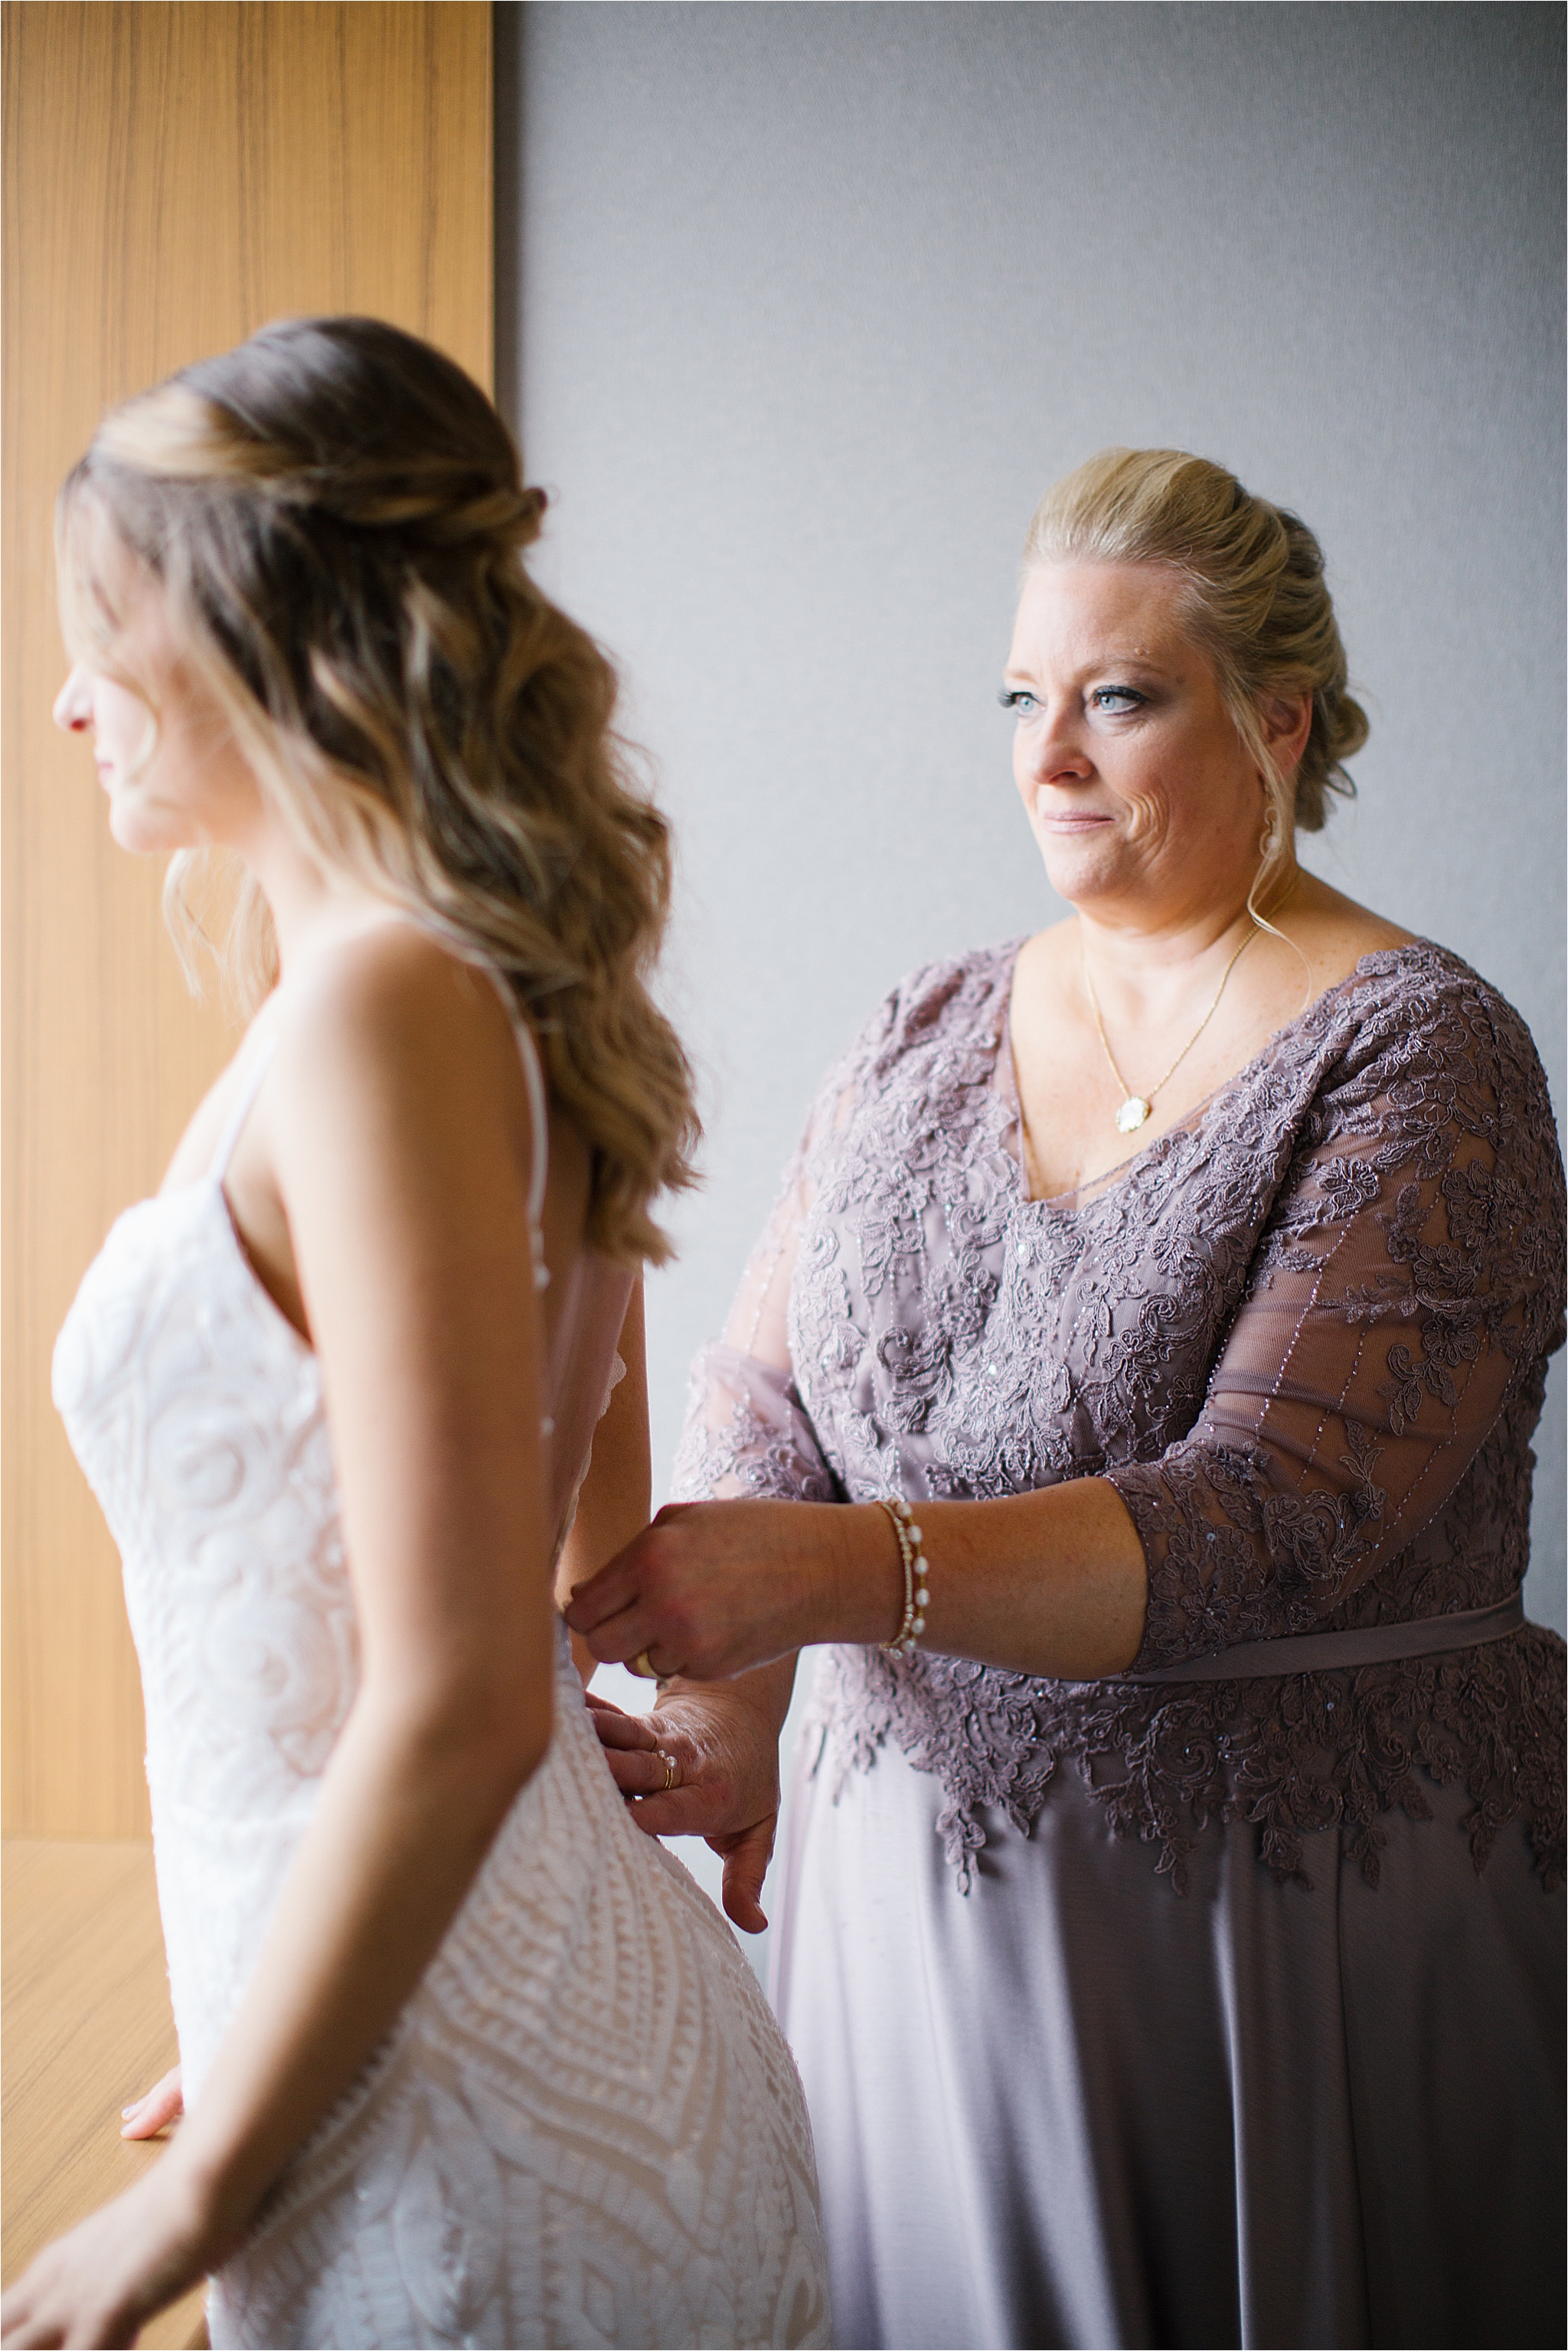 Mom helping bride into dress at Cleveland Wedding